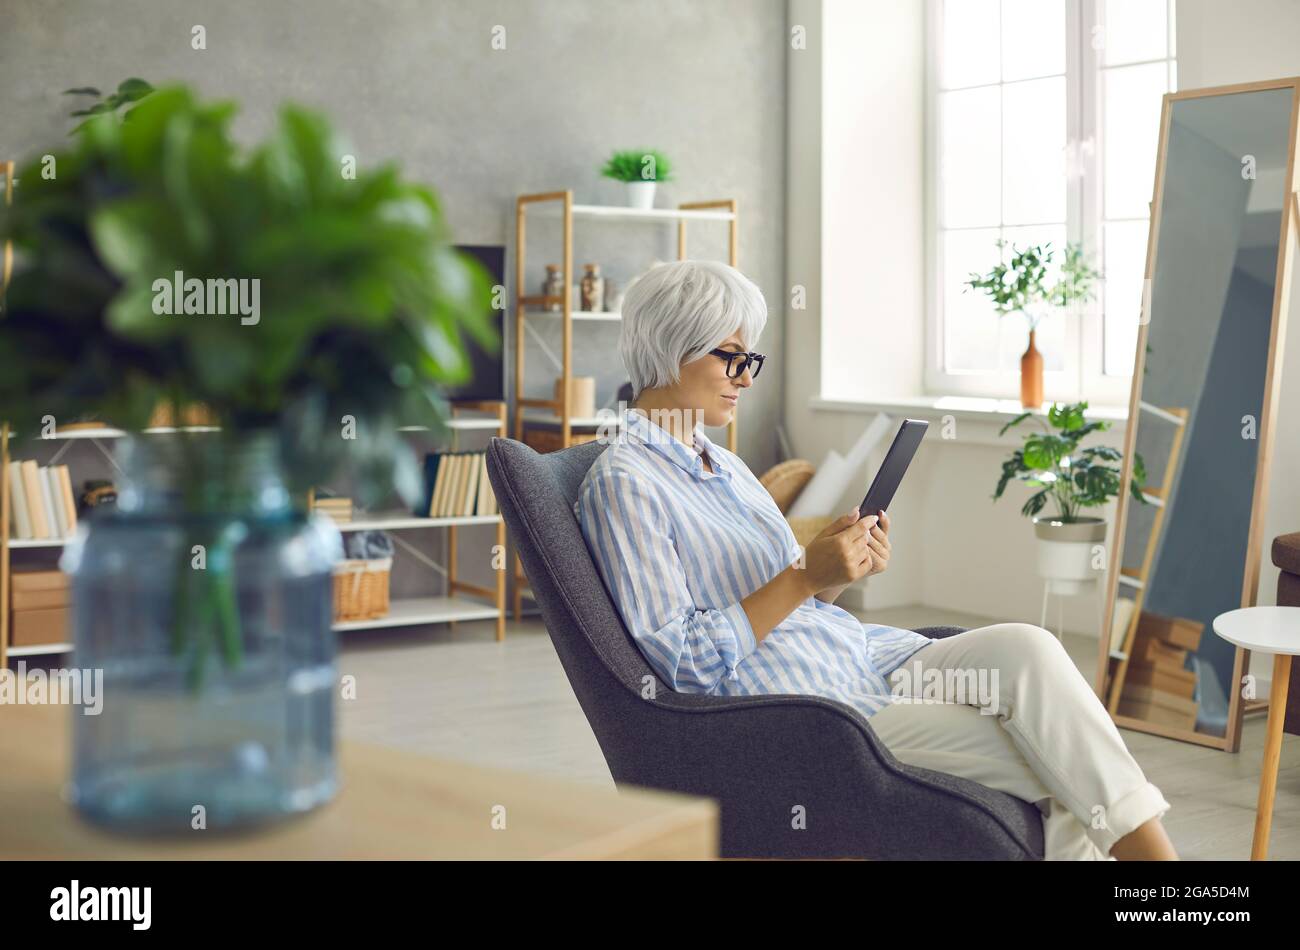 Relaxed senior woman sitting in armchair at home and reading book on digital tablet Stock Photo